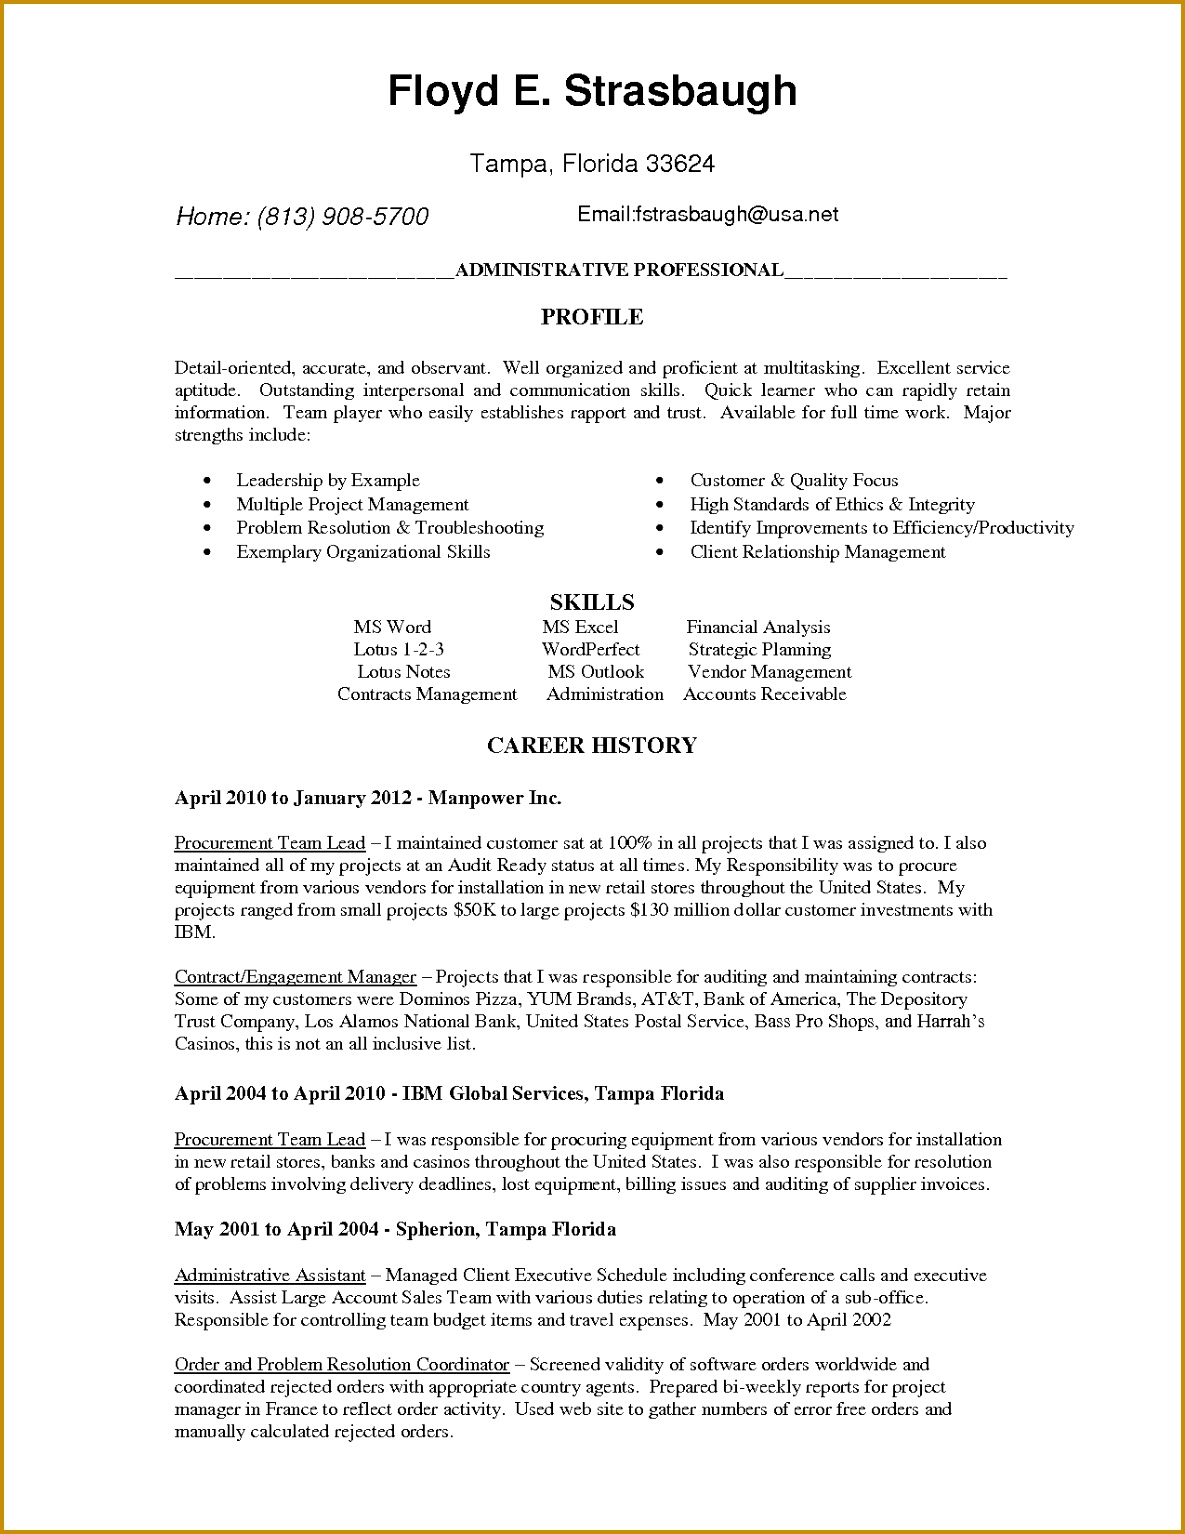 Professional Resume Cover Letter Template Od Specialist Cover Letter Lead therapist Cover Letter employment 15341185